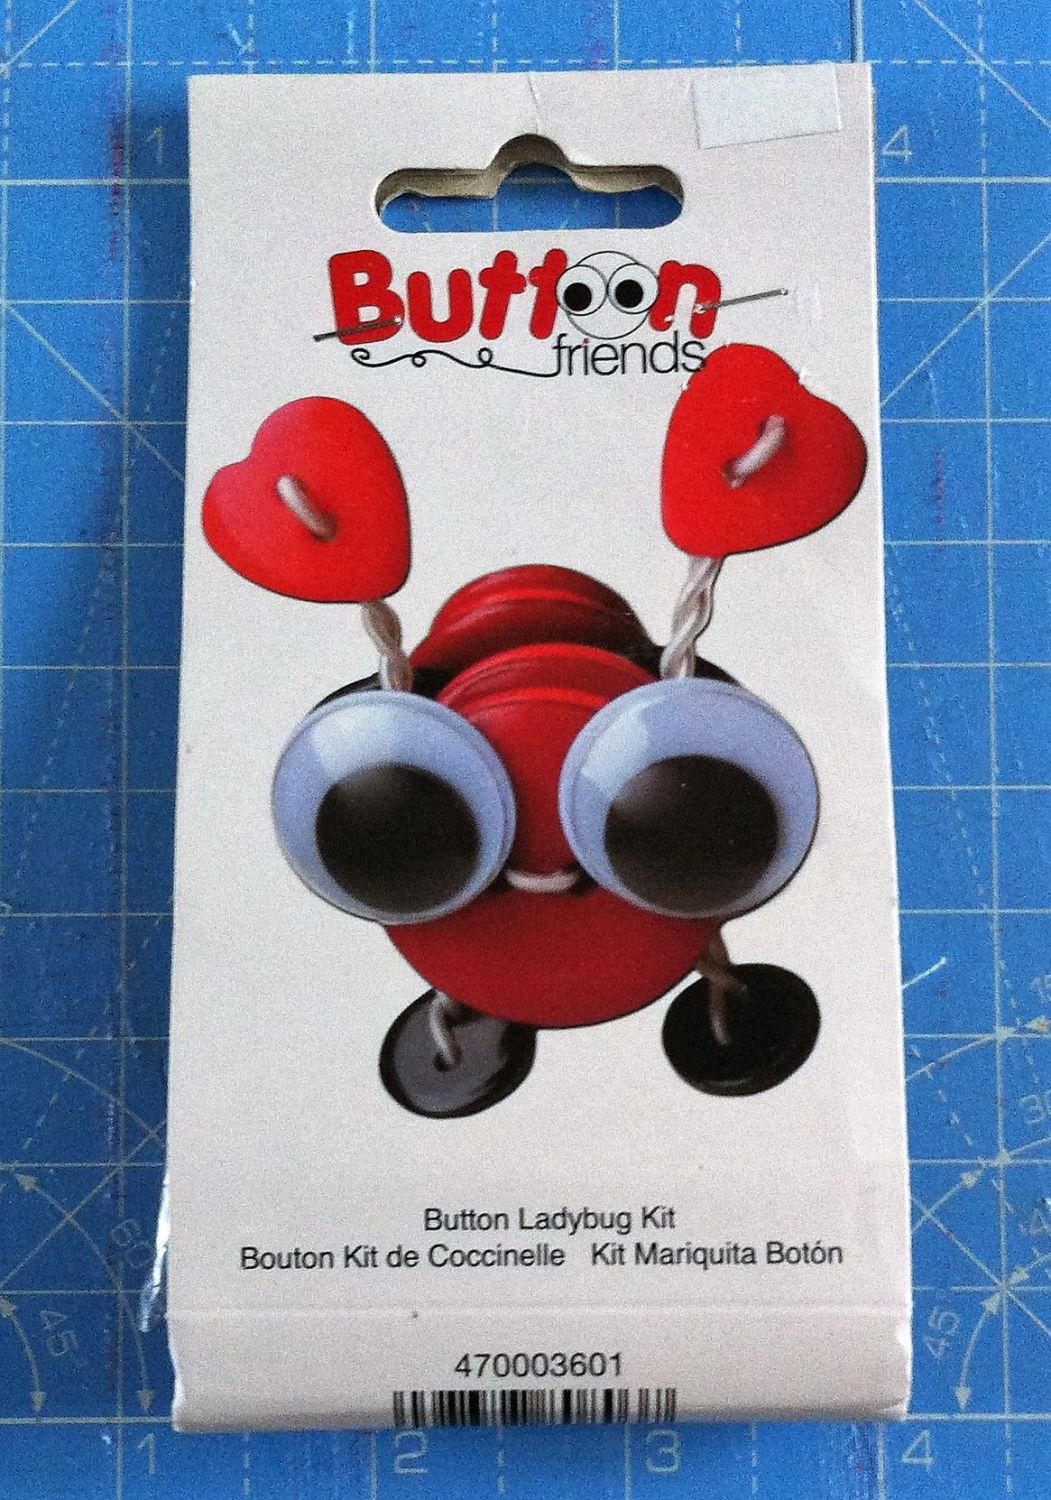 Kit 2001 Button Friends Ladybug by Button lovers